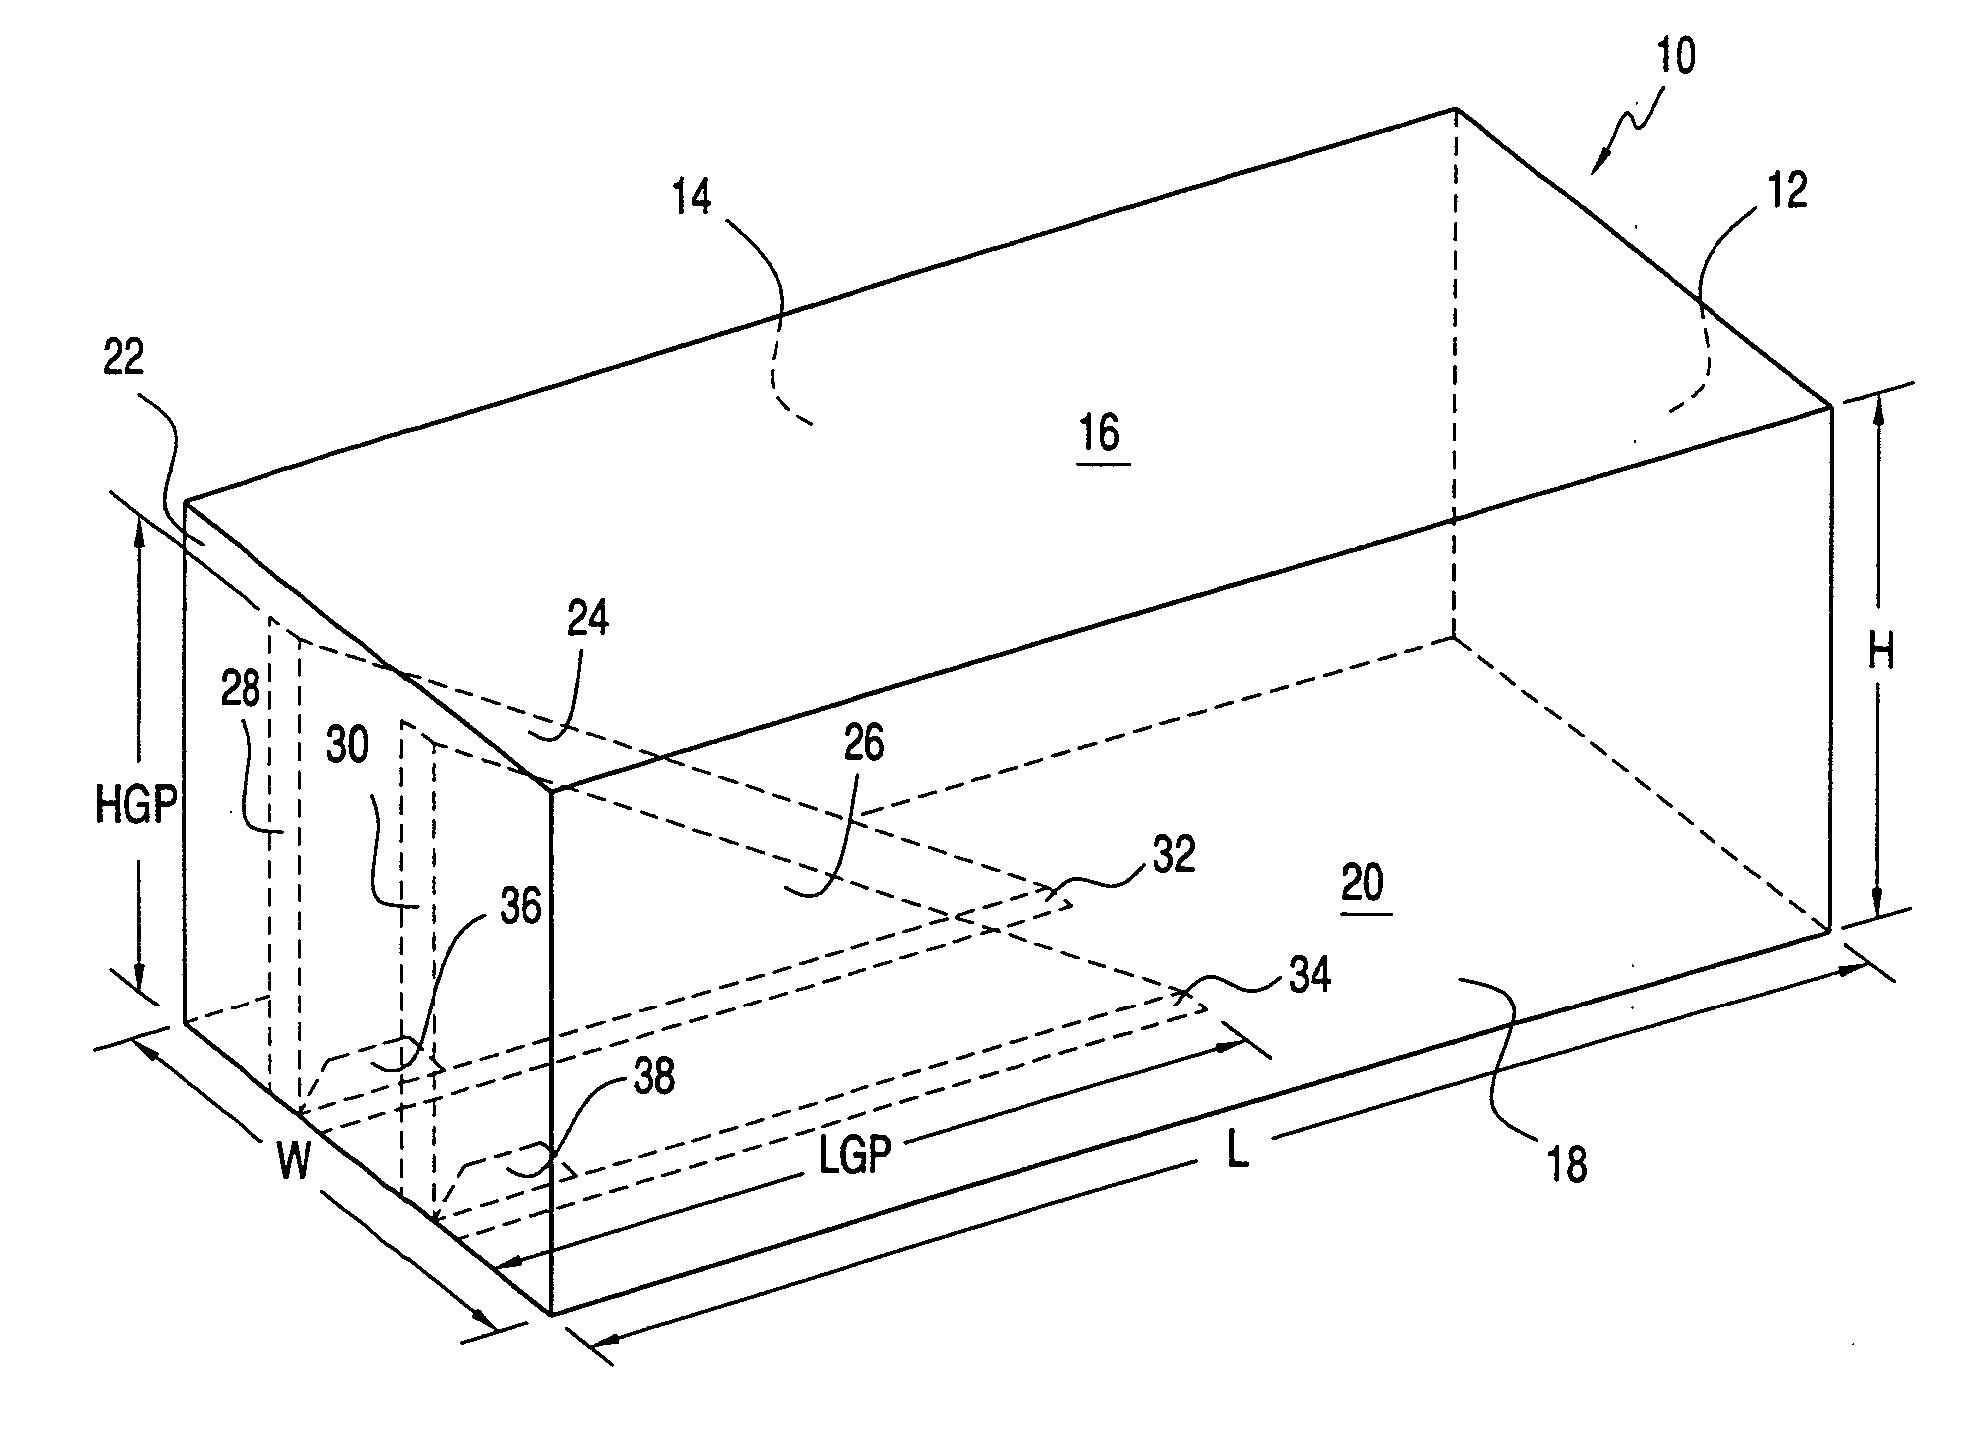 Bulk material cargo container liner with internal restraint system for preventing the outward bulging of the liner